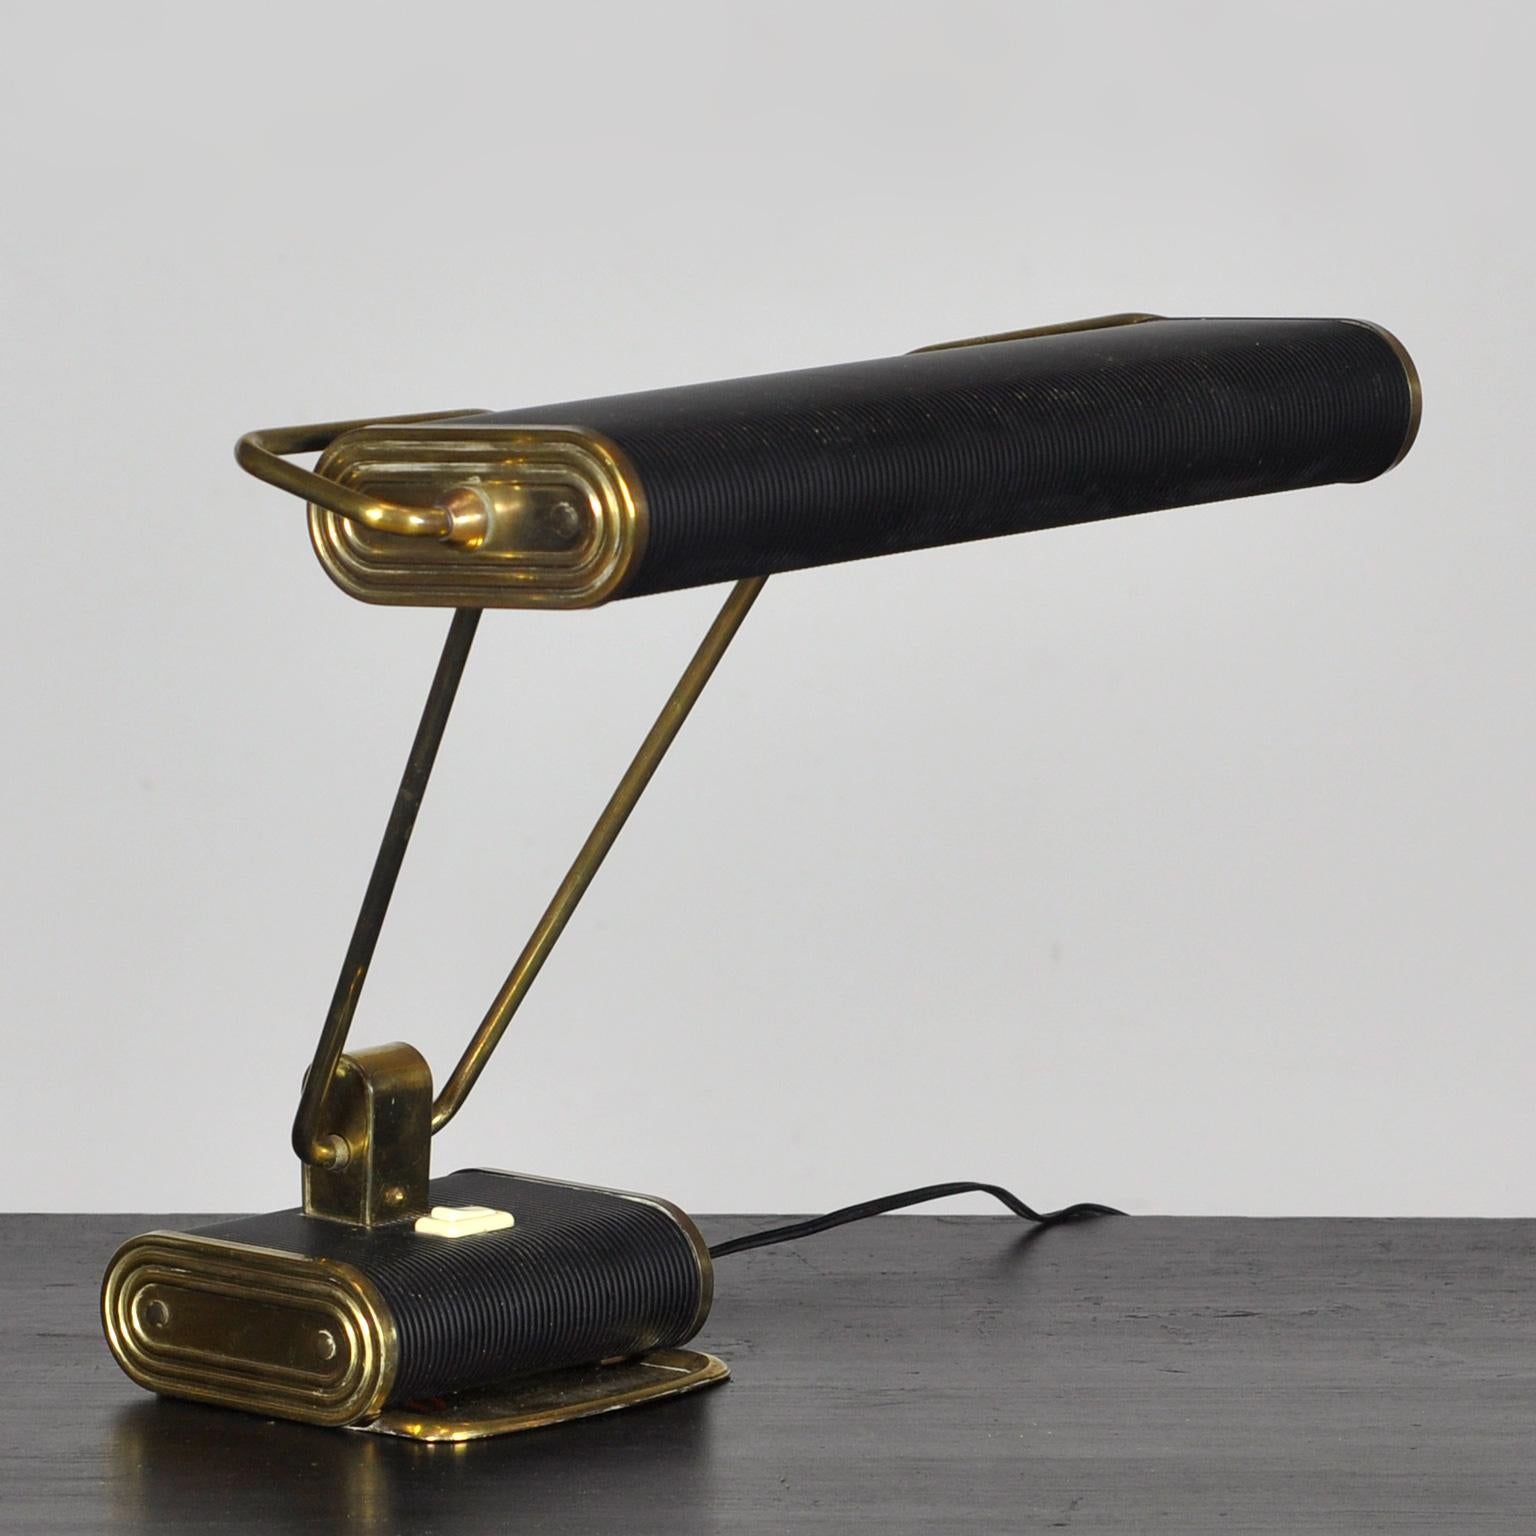 Fantastic brass and black metal desk lamp n°71 by André Mounique produced by Jumo in France ca. 1940s.
The lamp consists of corrugated steel and the original black-painted and chromed brass pipe. The long double arm can be tilted forward as well as